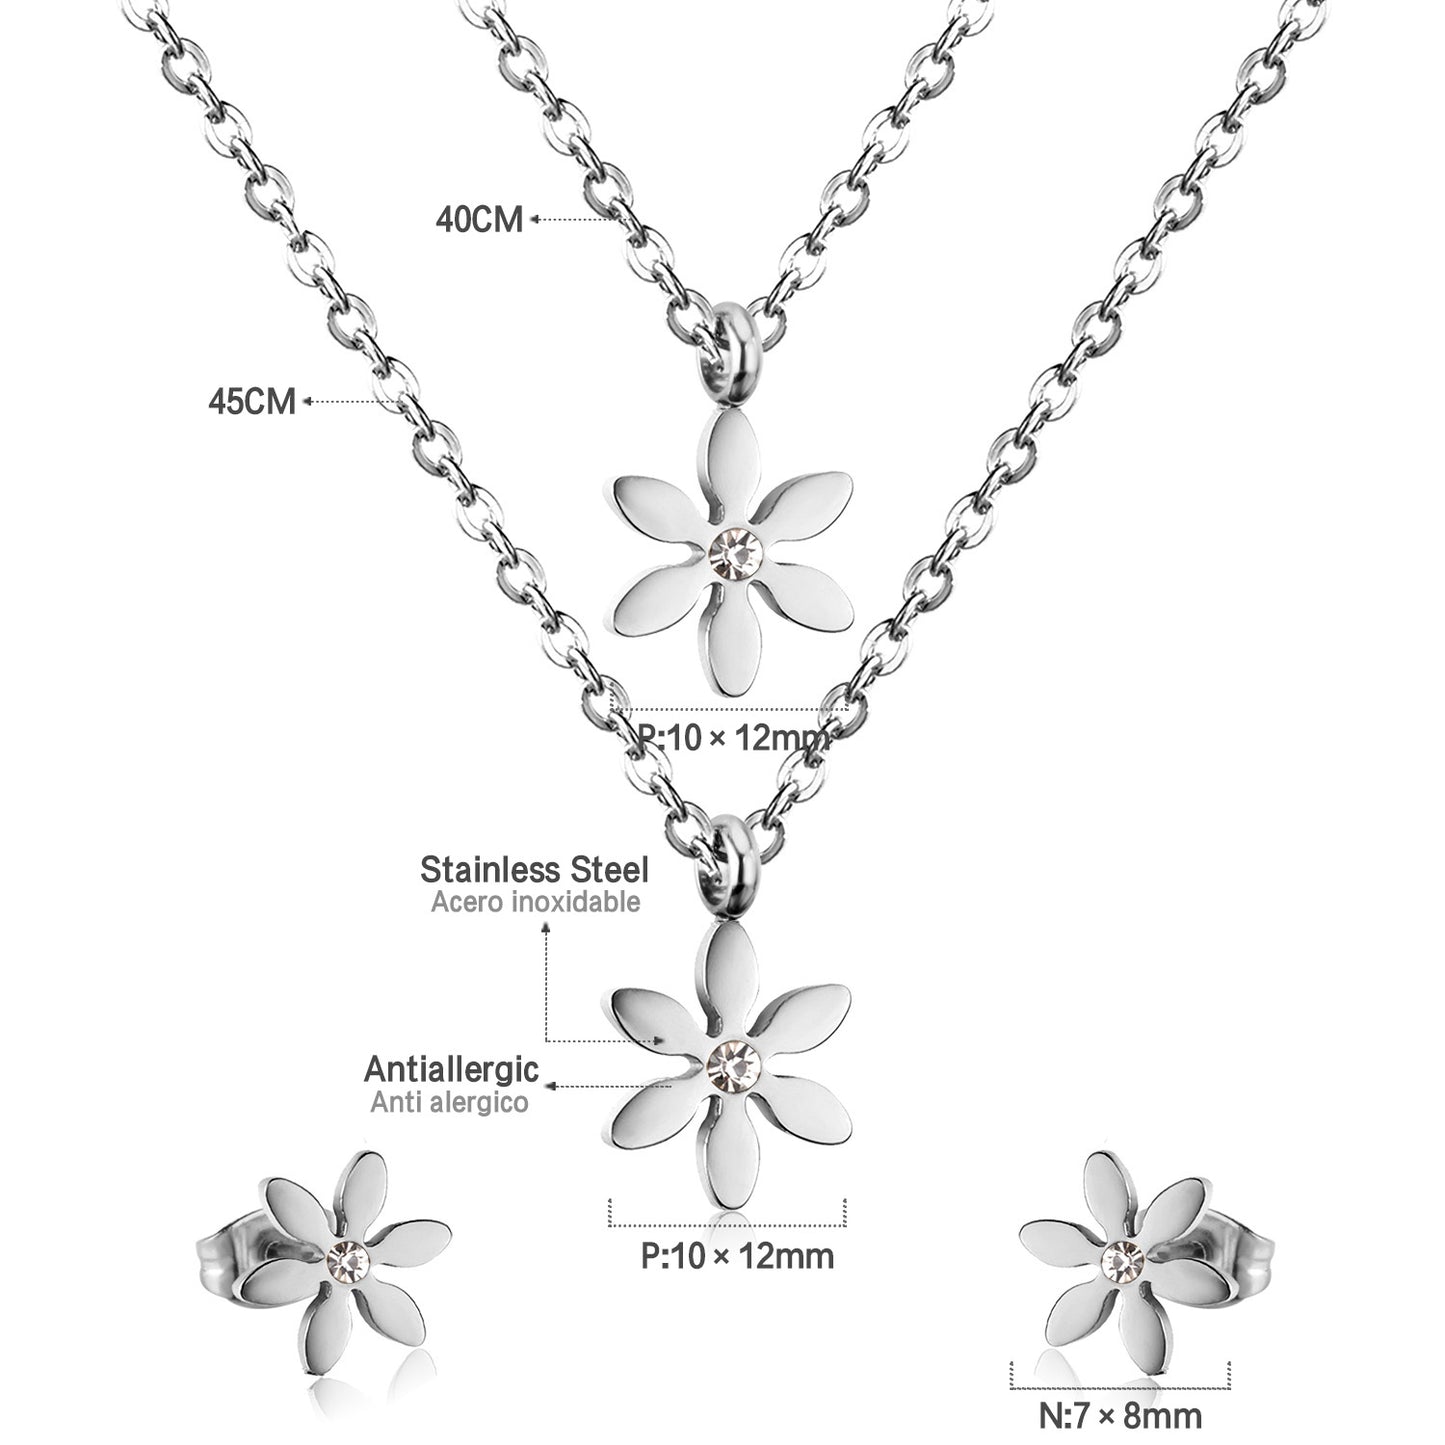 Children's, Teens' and Mothers' Necklace and Earrings Sets:  Surgical Steel, Gold IP Layered Flower Necklace with Matching Earrings with CZ and Gift box.